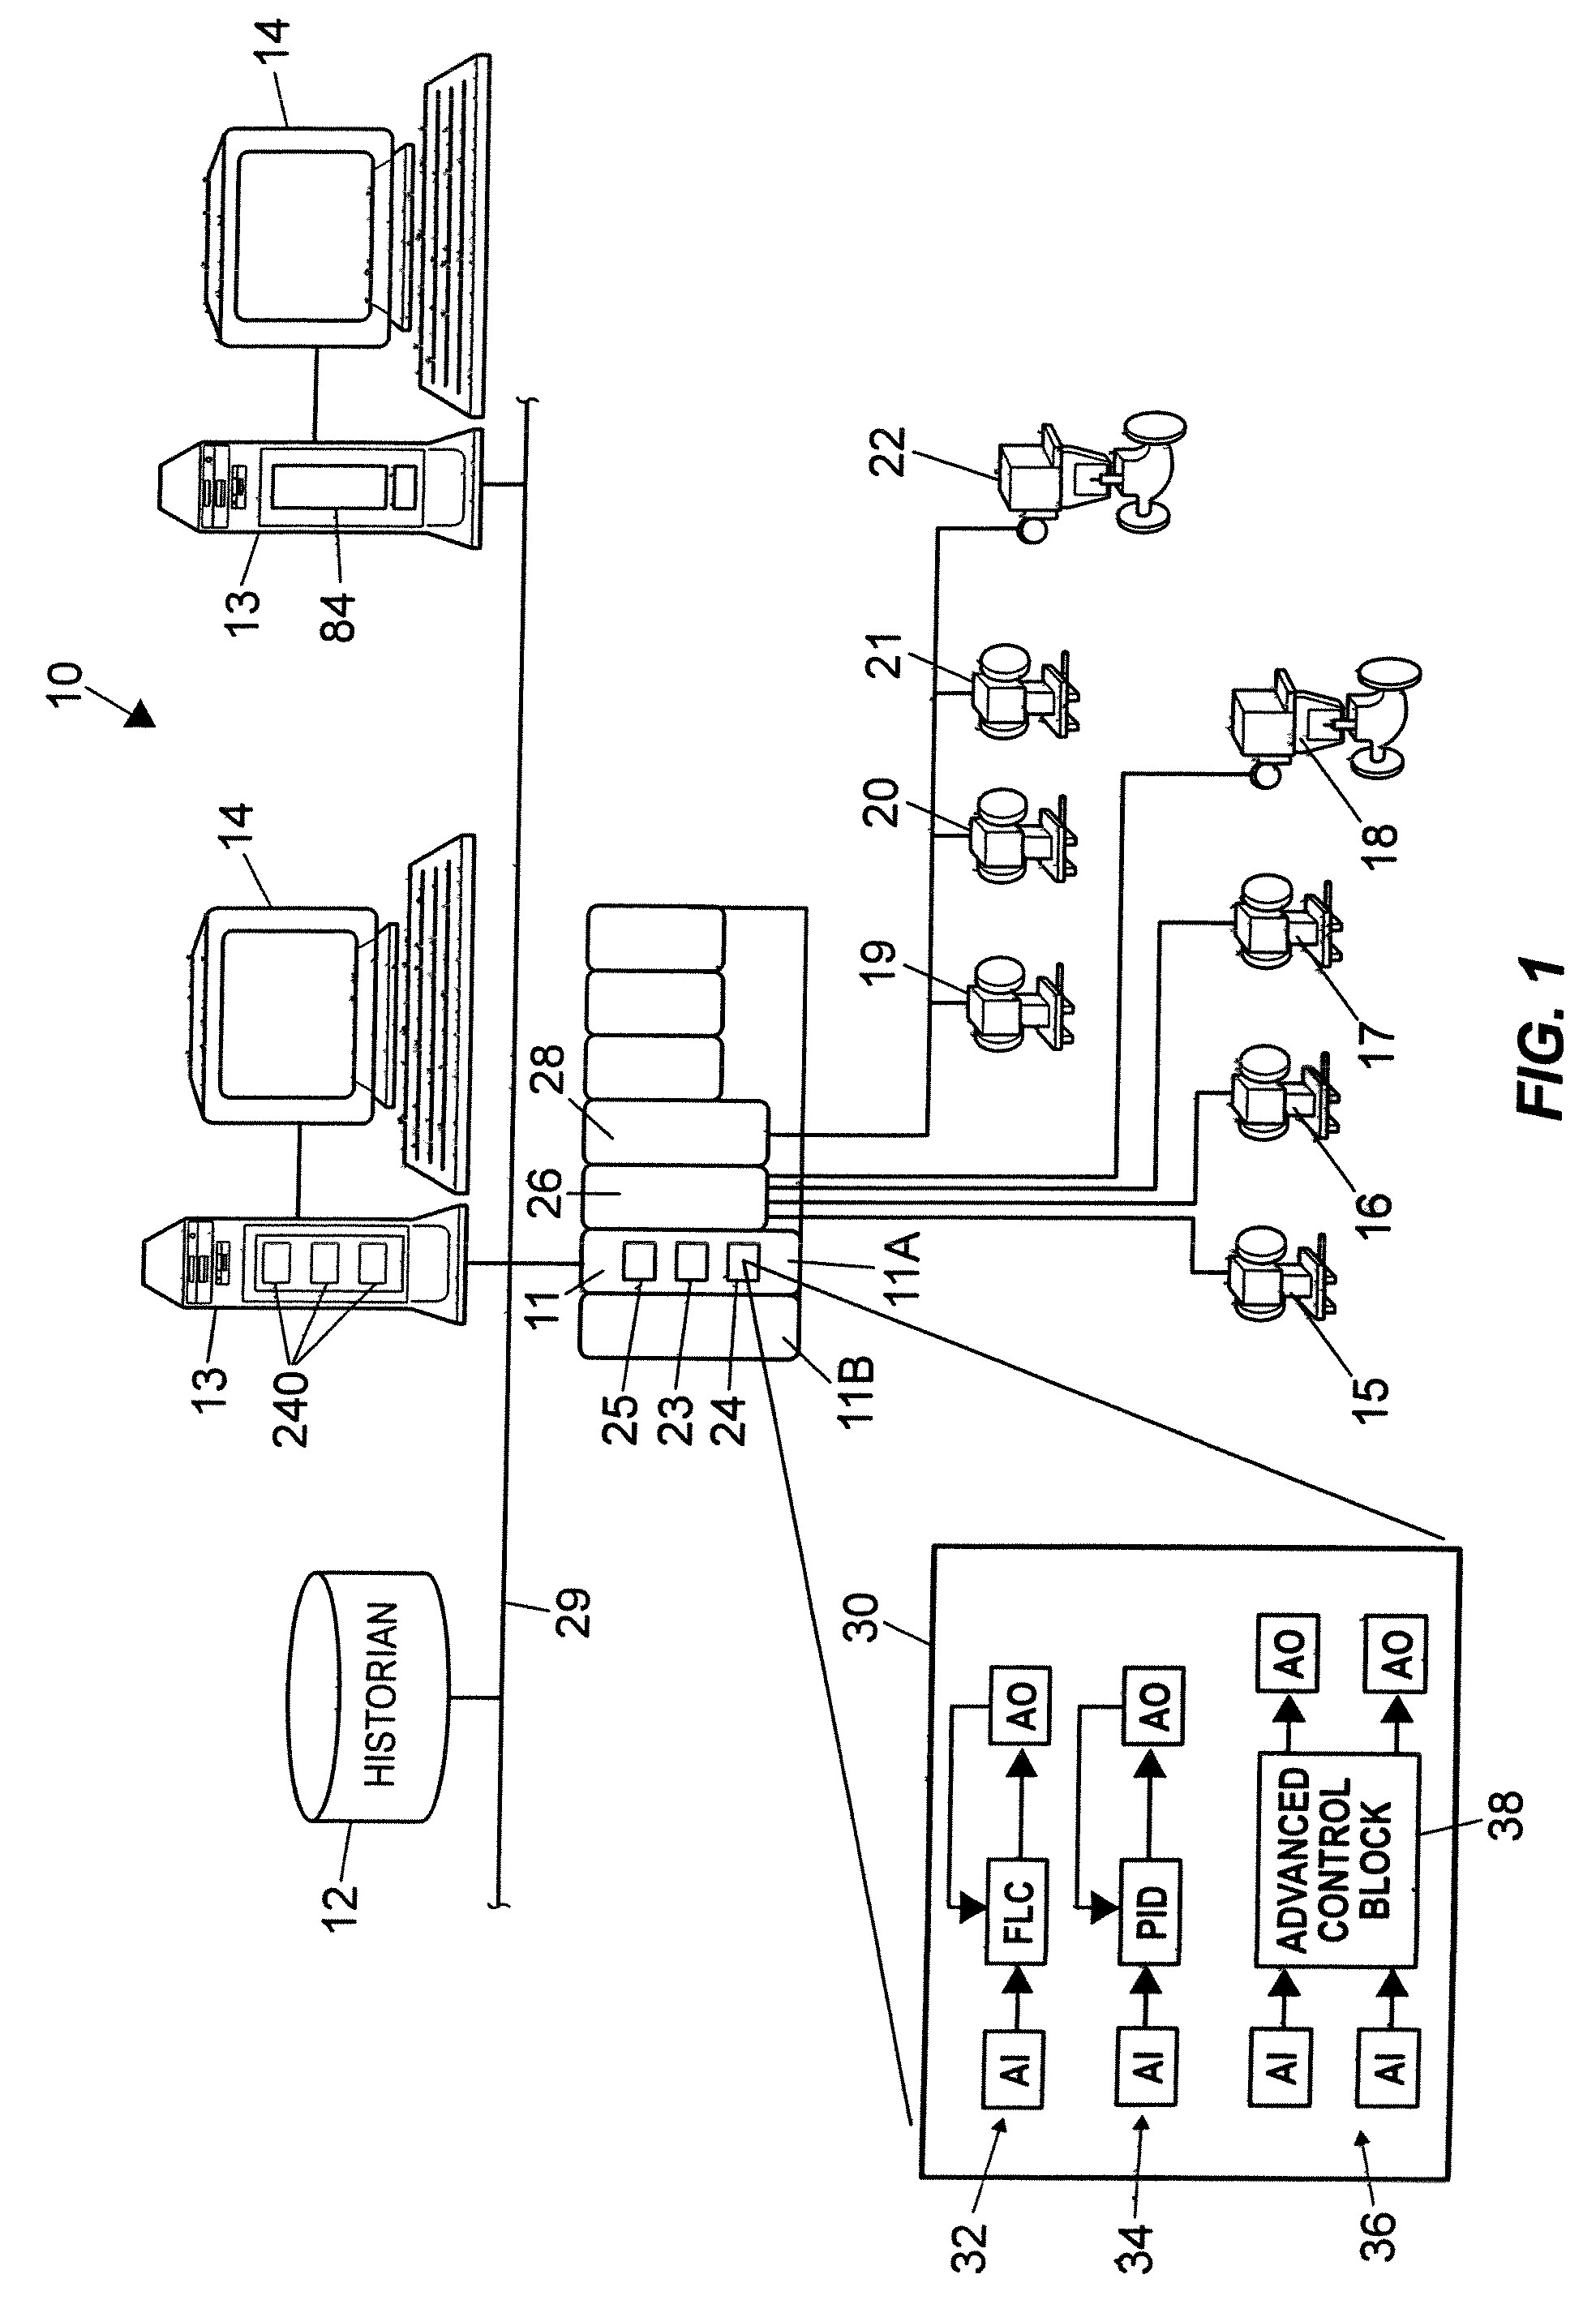 Analytical server integrated in a process control network